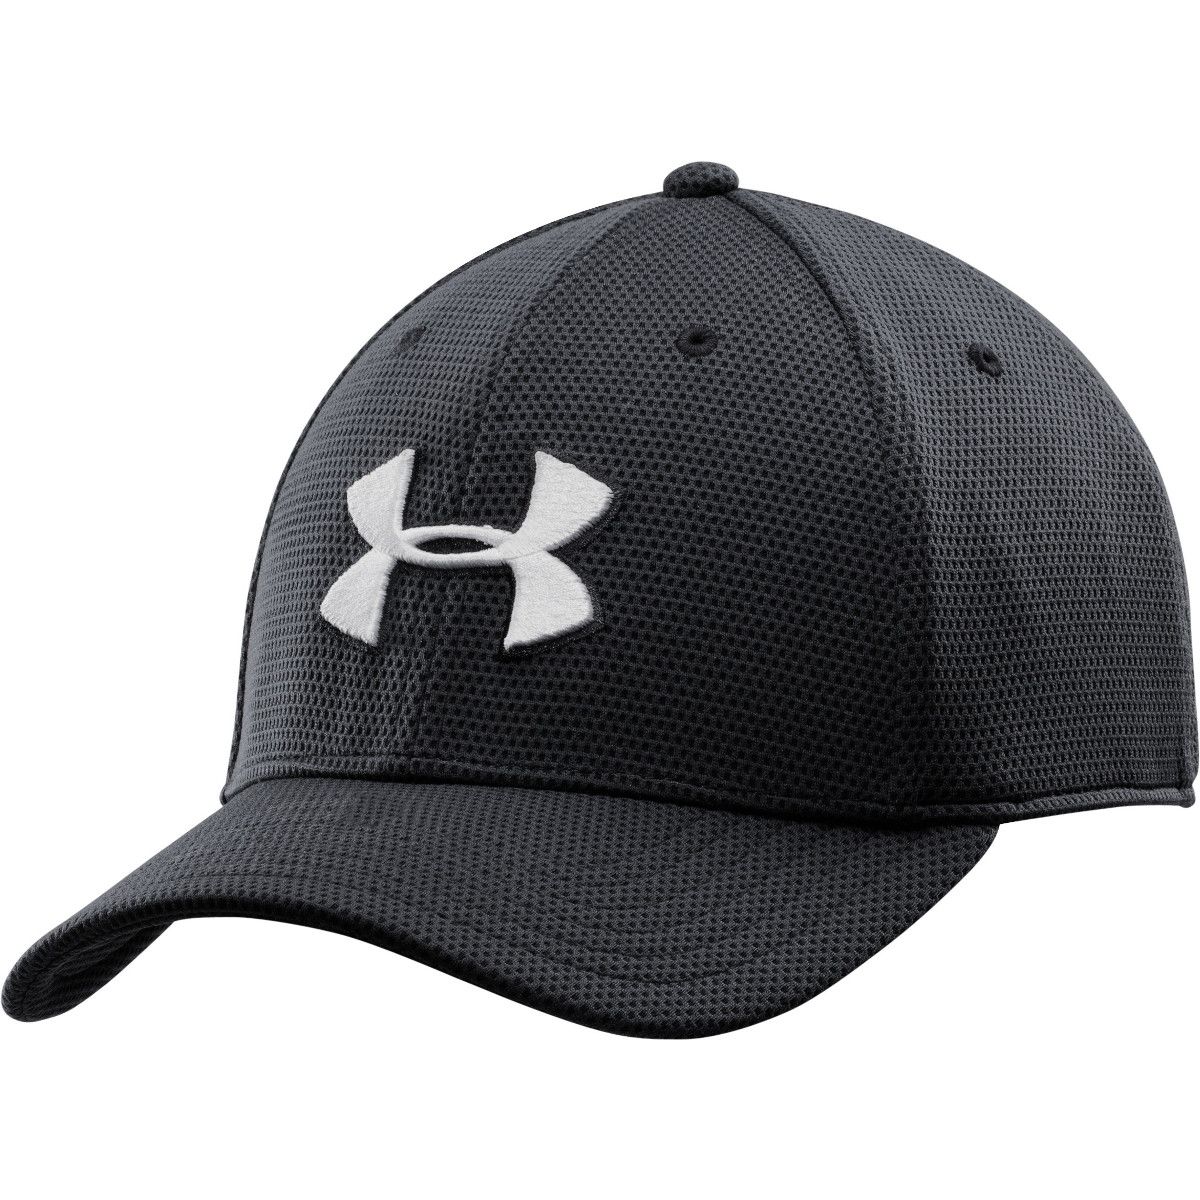 Under Armour Blitzing II Stretch Fit Cap 1254123-001